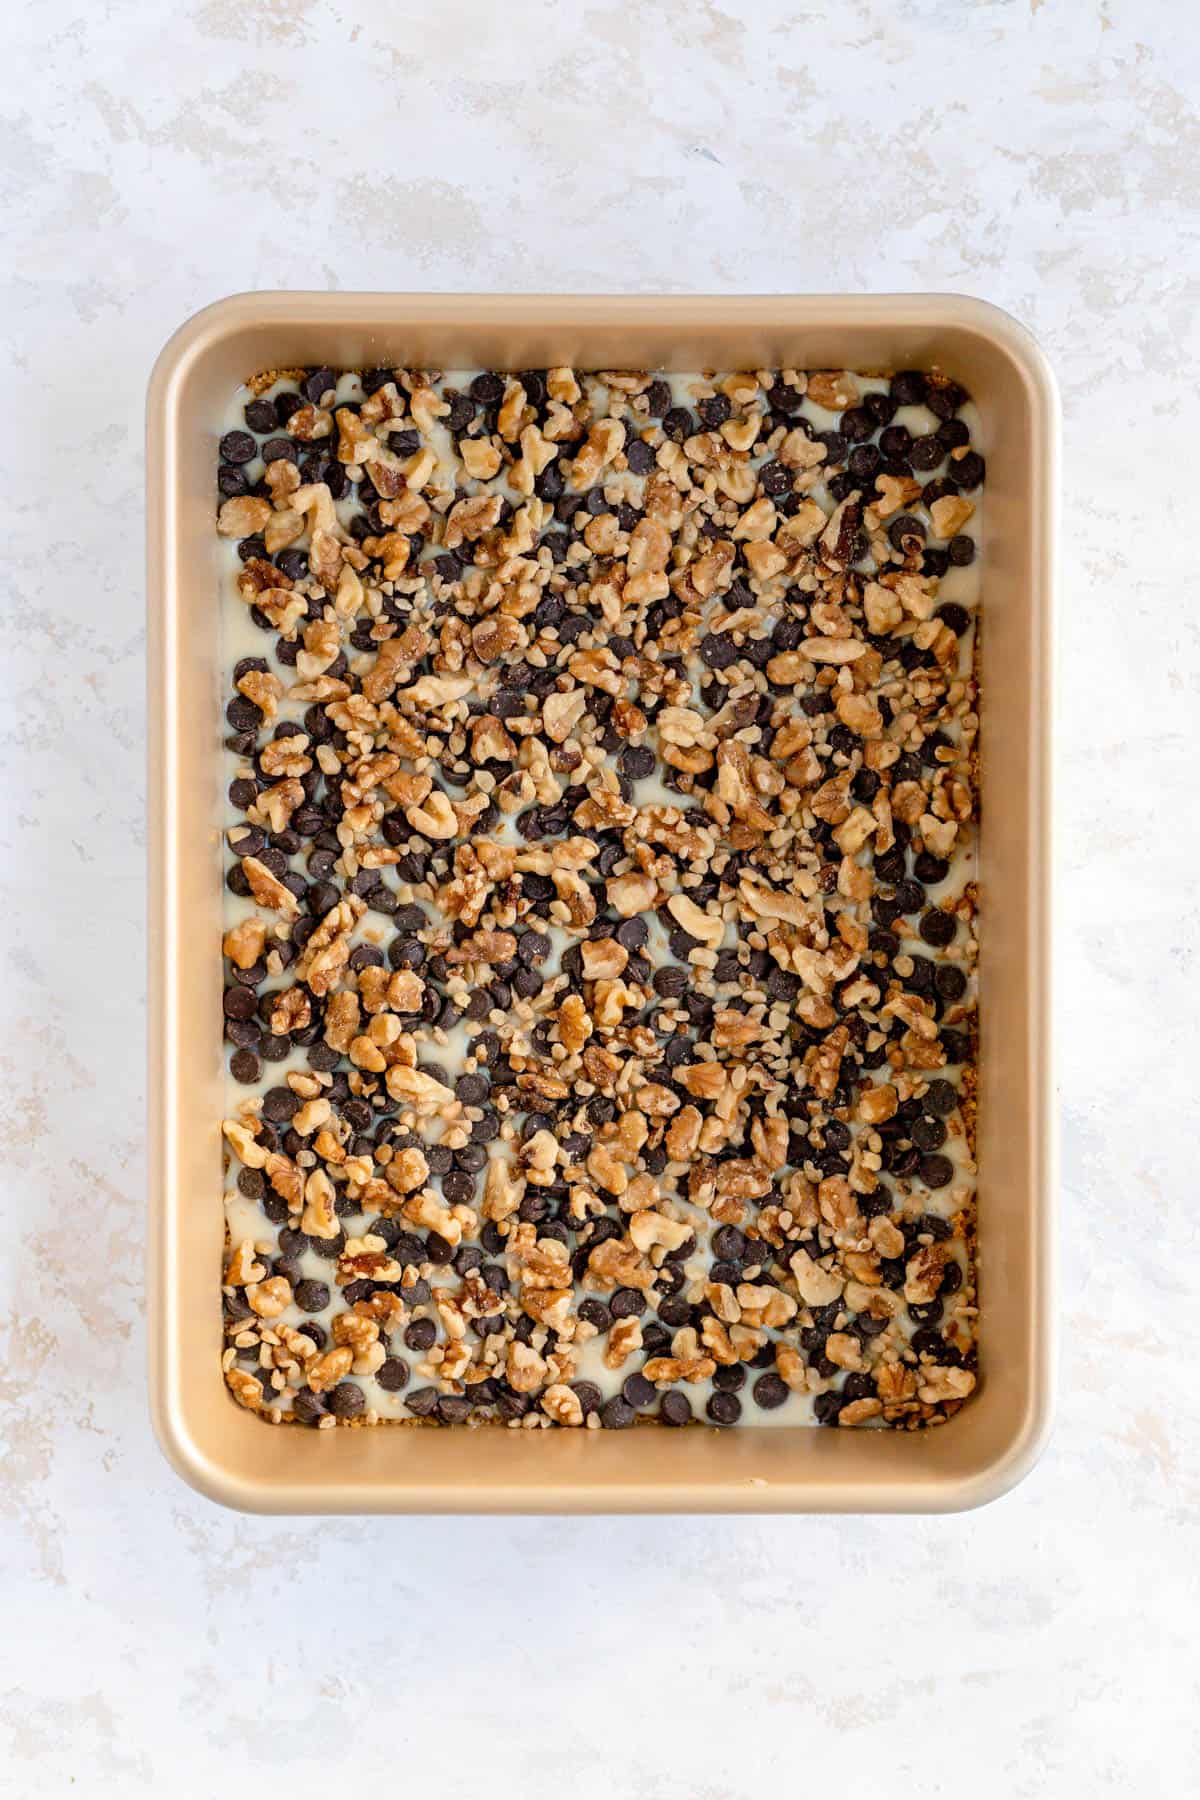 Walnuts sprinkled over chocolate chips and condensed milk in a gold 9 x 13 pan